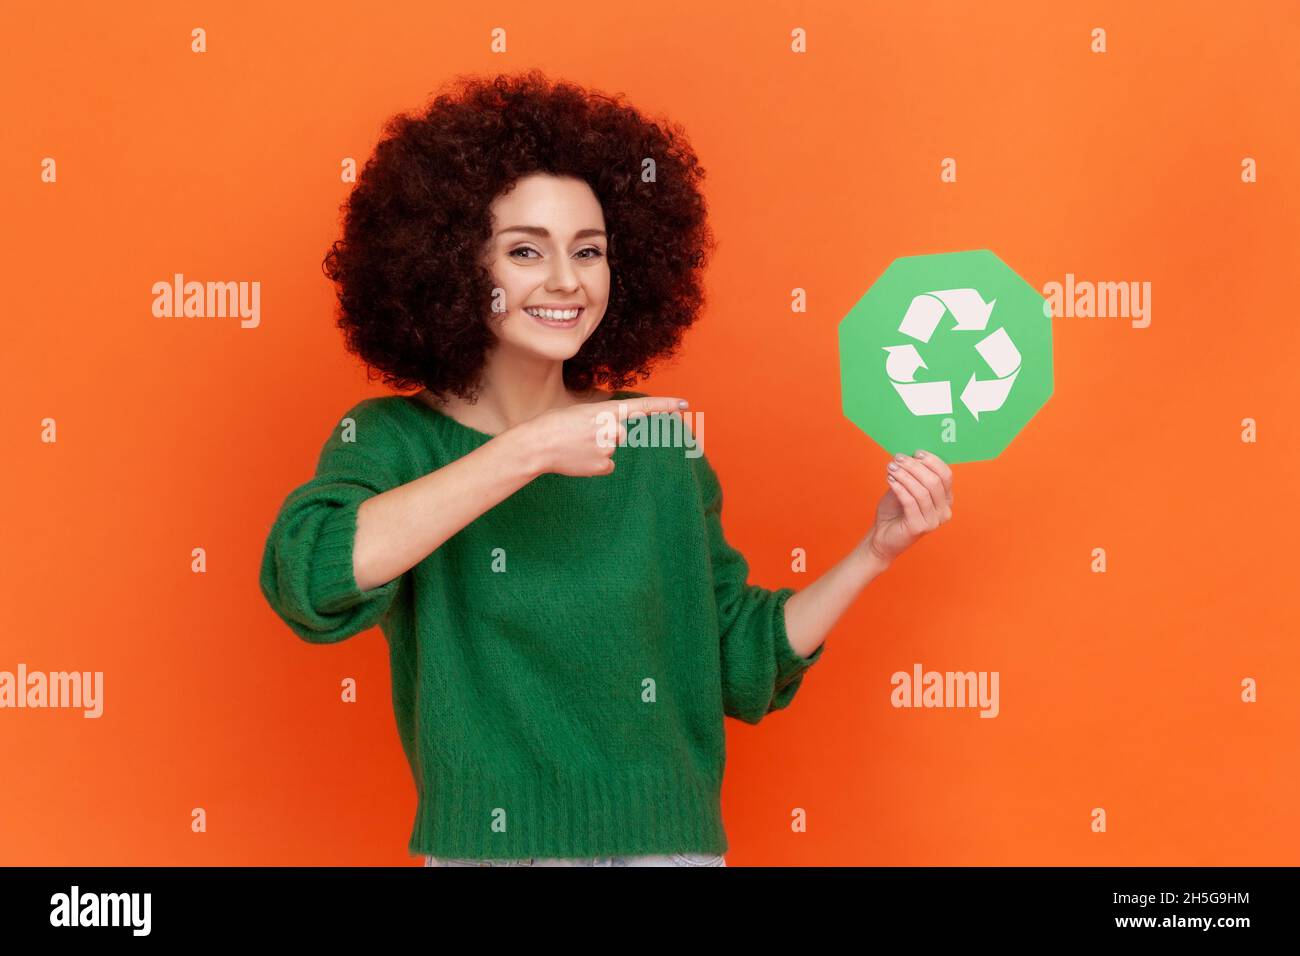 Satisfied woman with Afro hairstyle wearing green casual style sweater pointing at green recycling symbol in her hands, ecology concept. Indoor studio shot isolated on orange background. Stock Photo